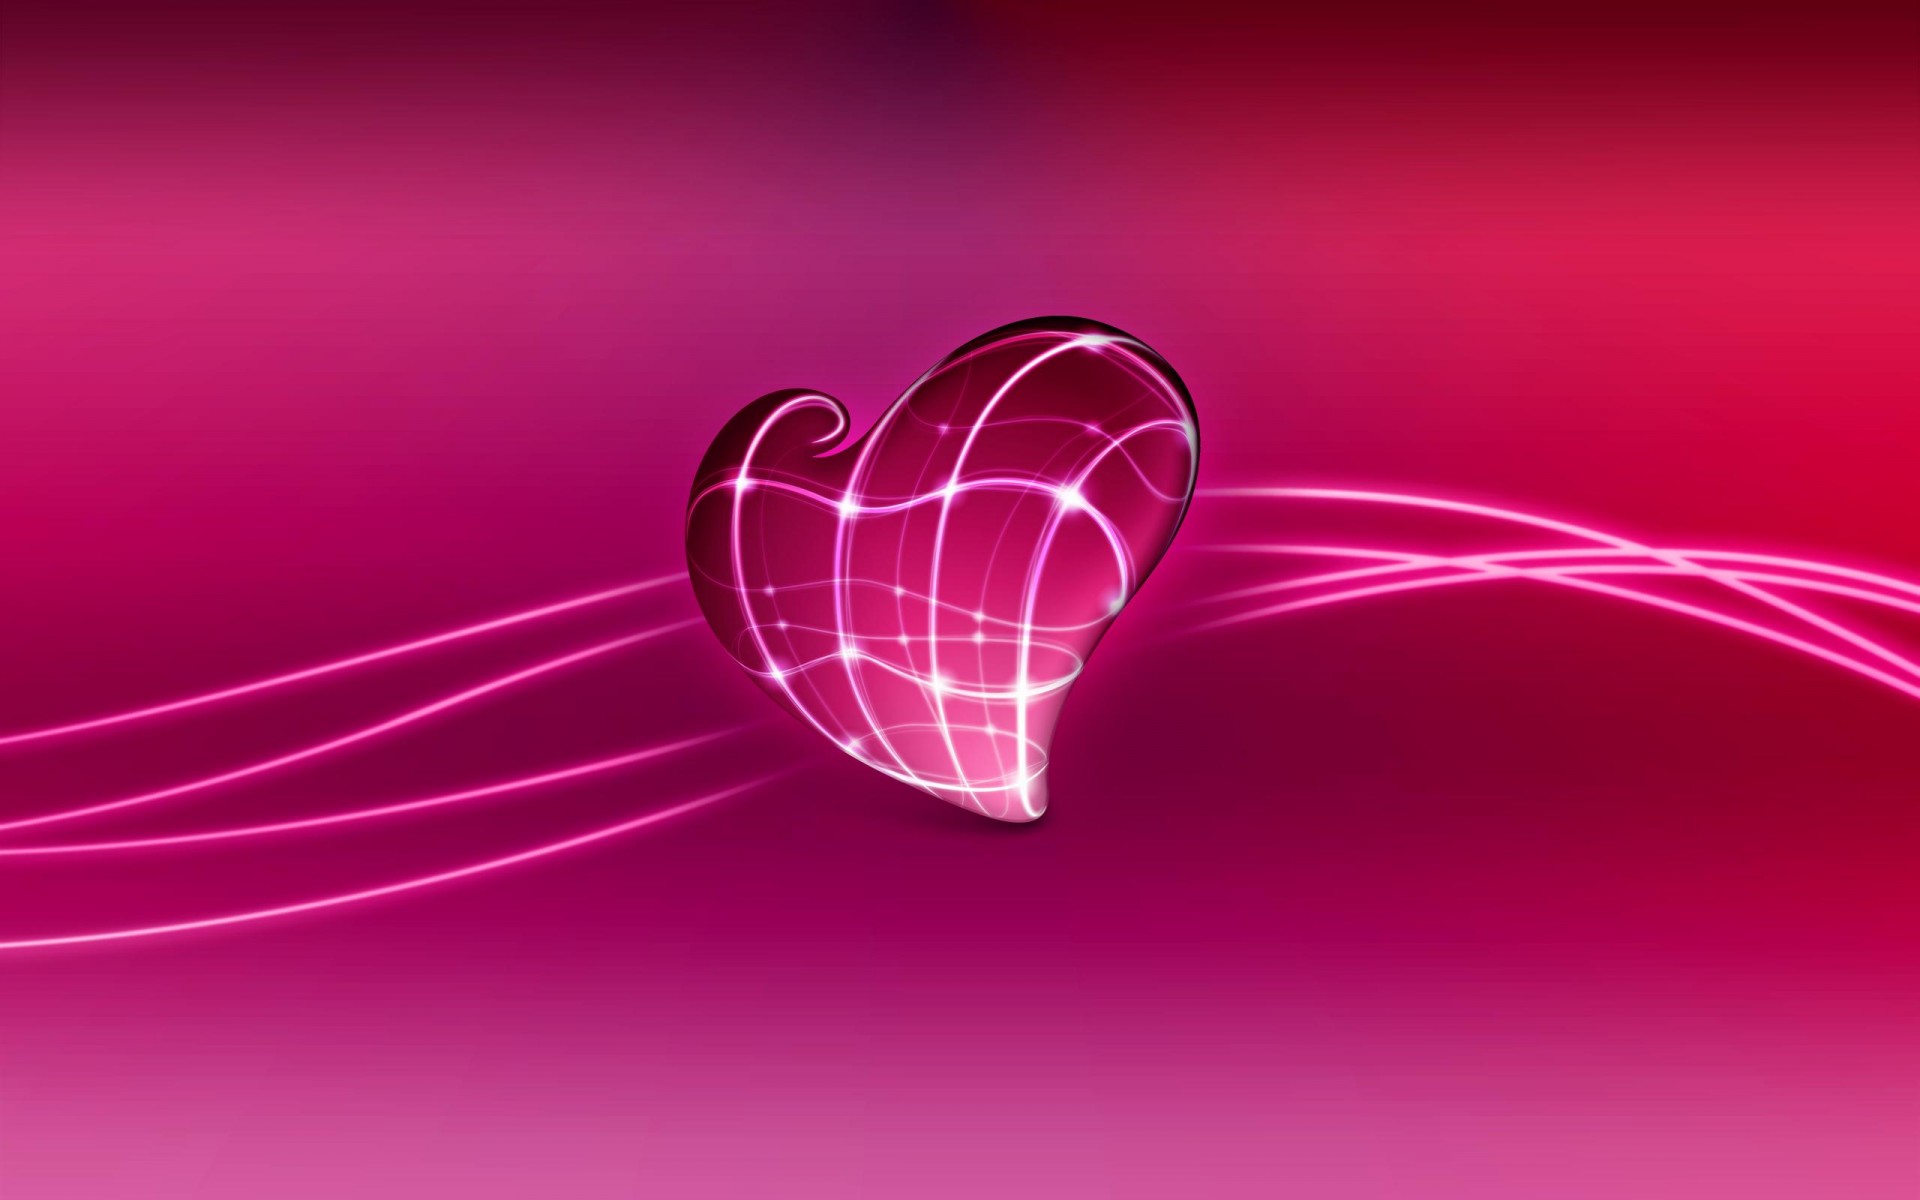 Abstract Heart and Lines backgrounds